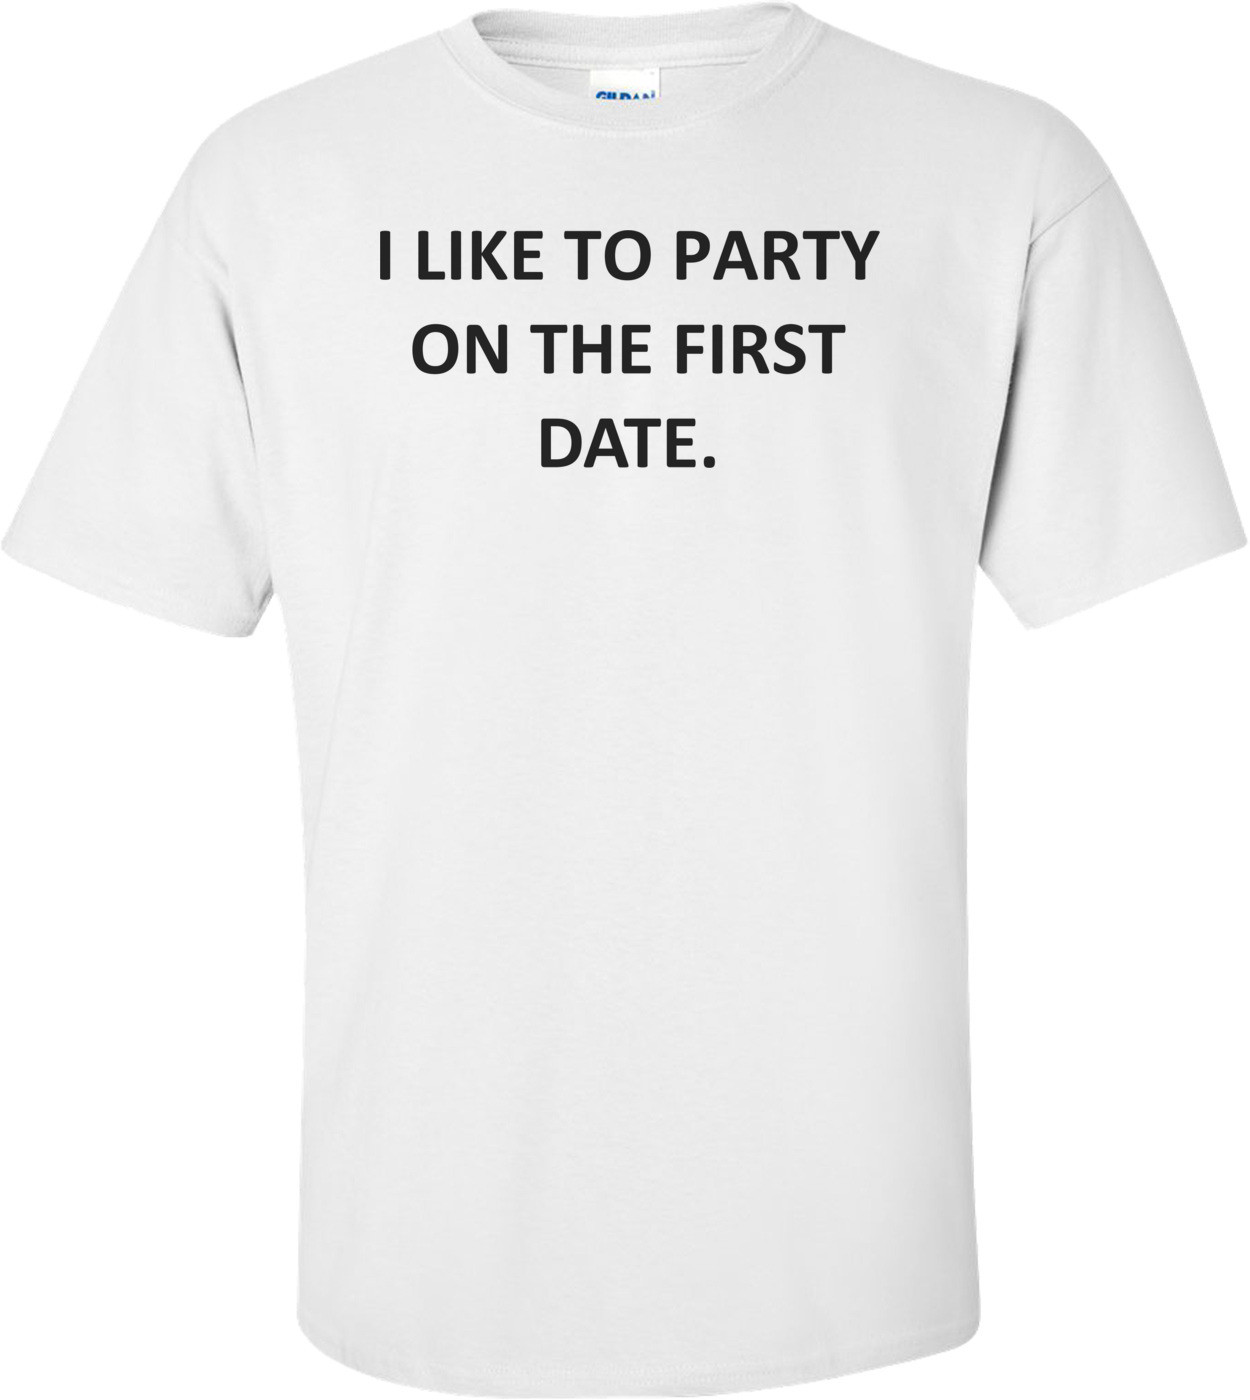 I LIKE TO PARTY ON THE FIRST DATE.